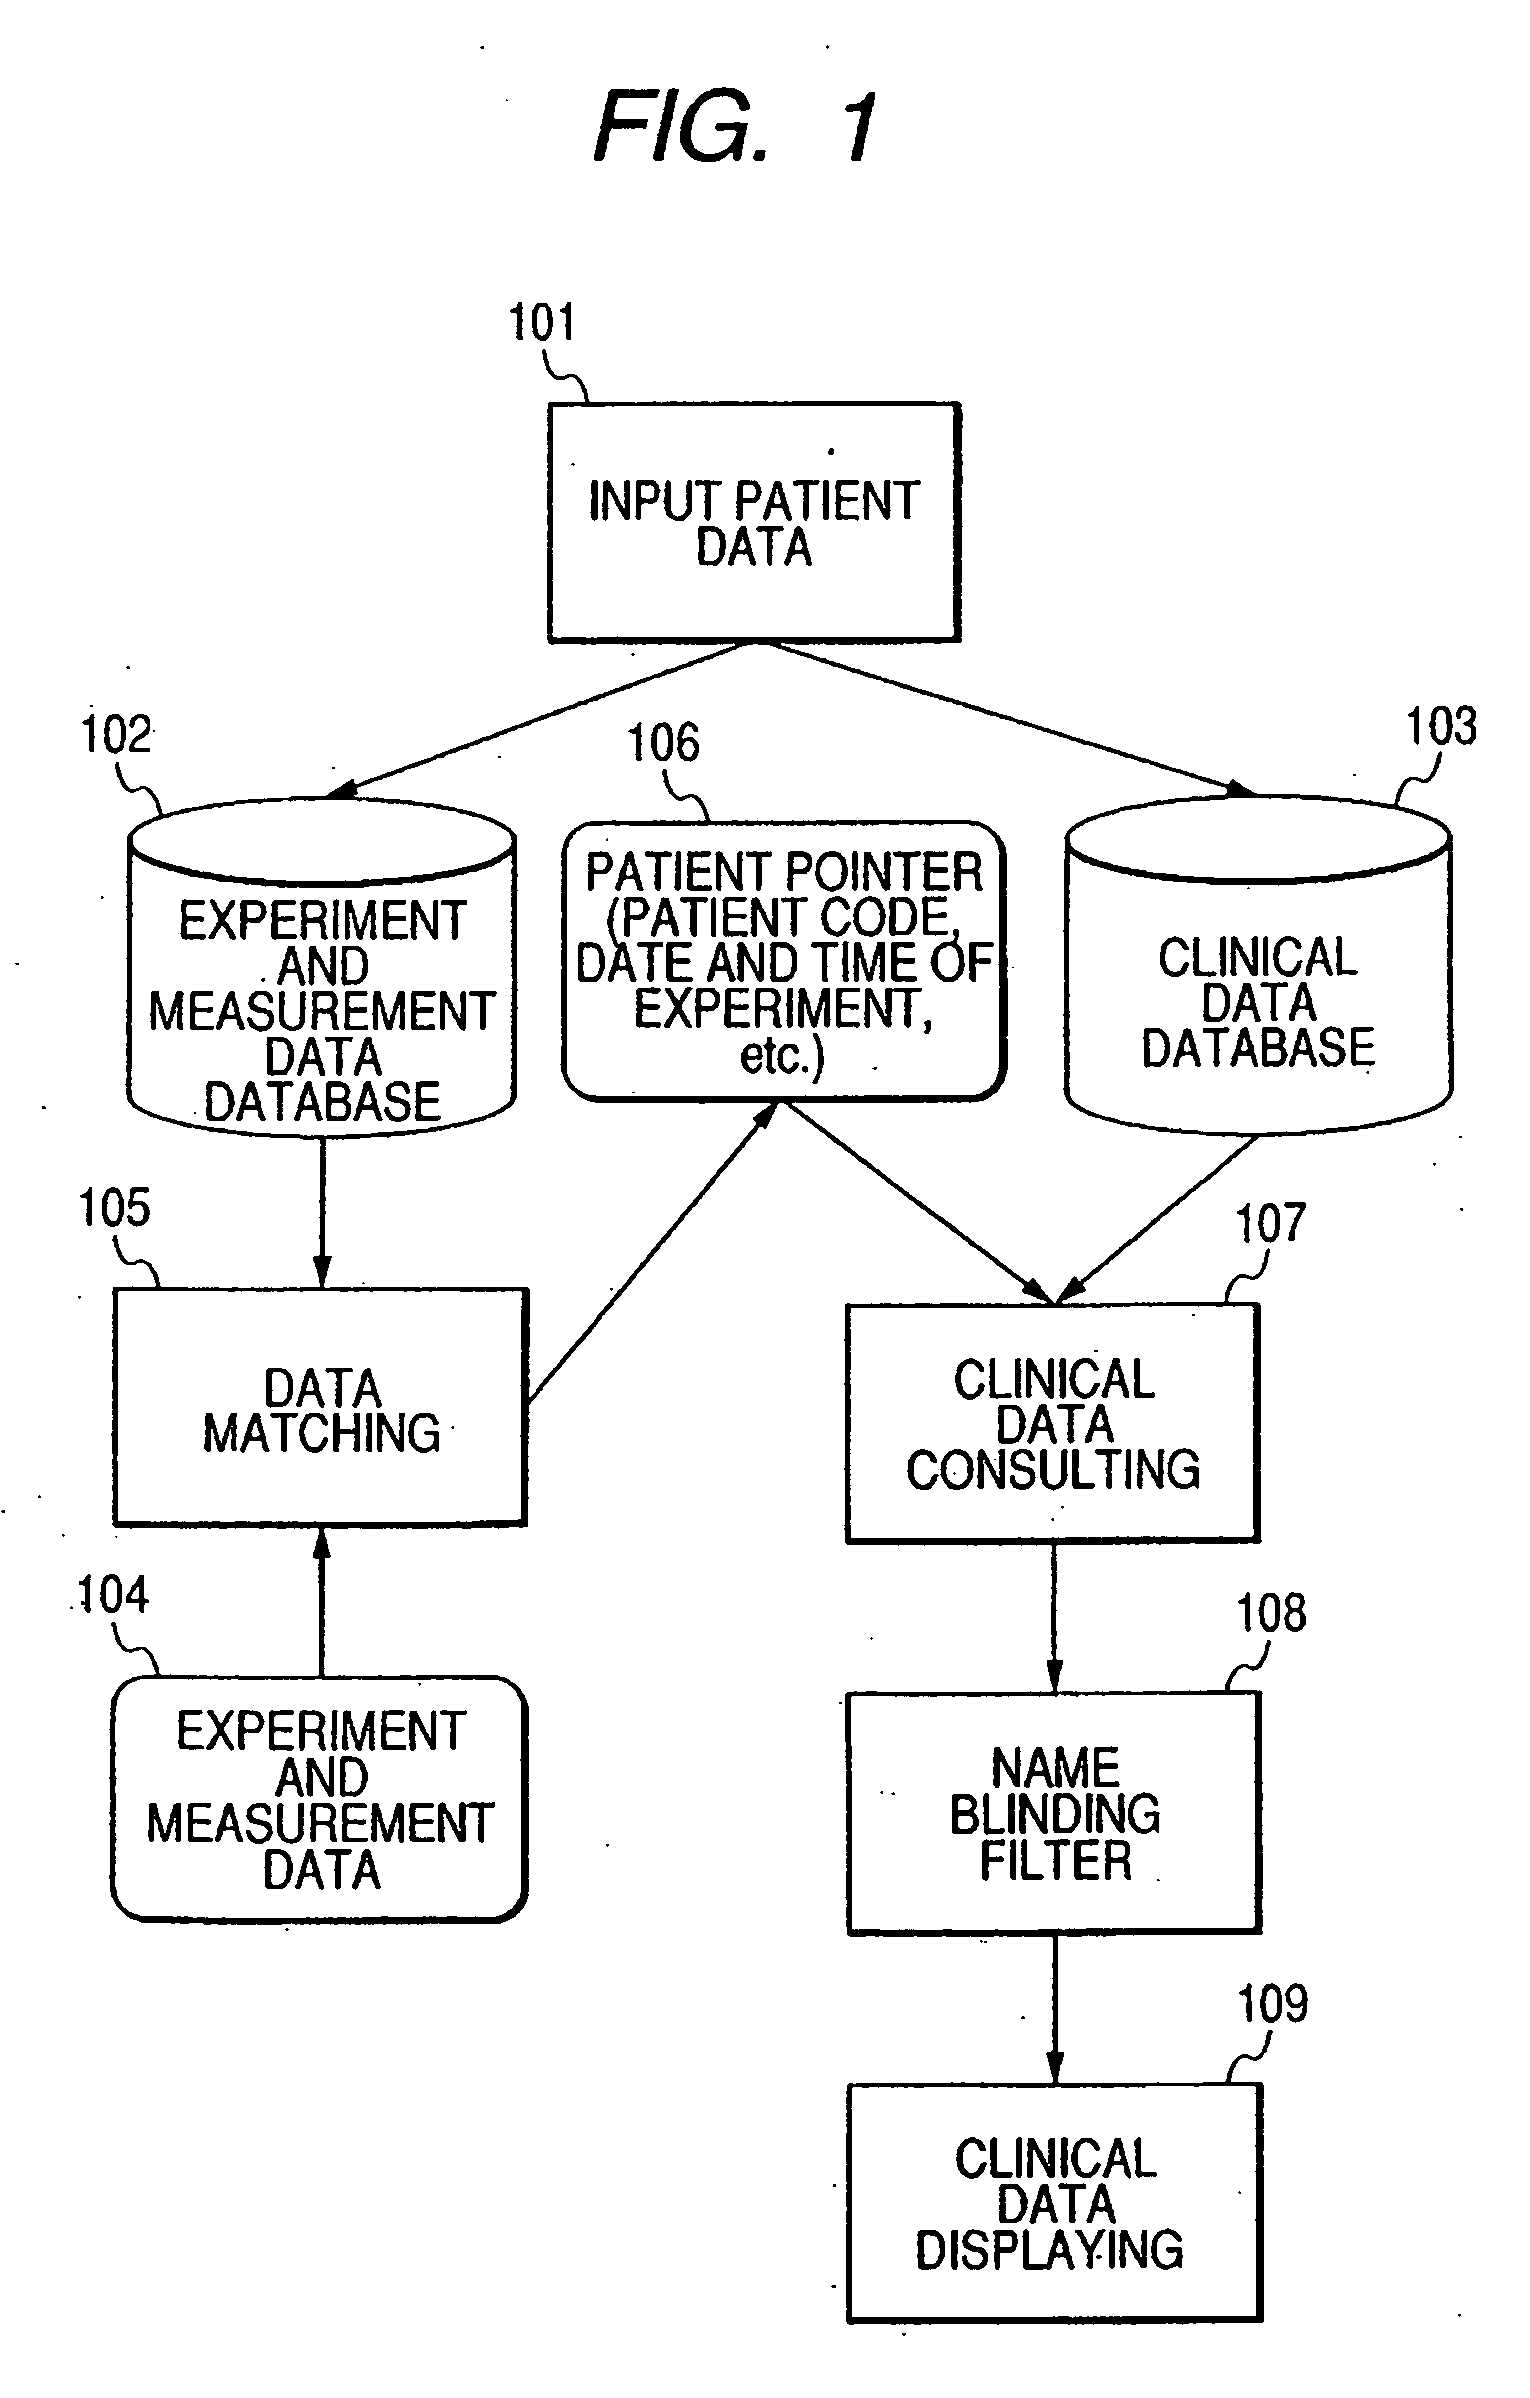 Electronic clinical chart system